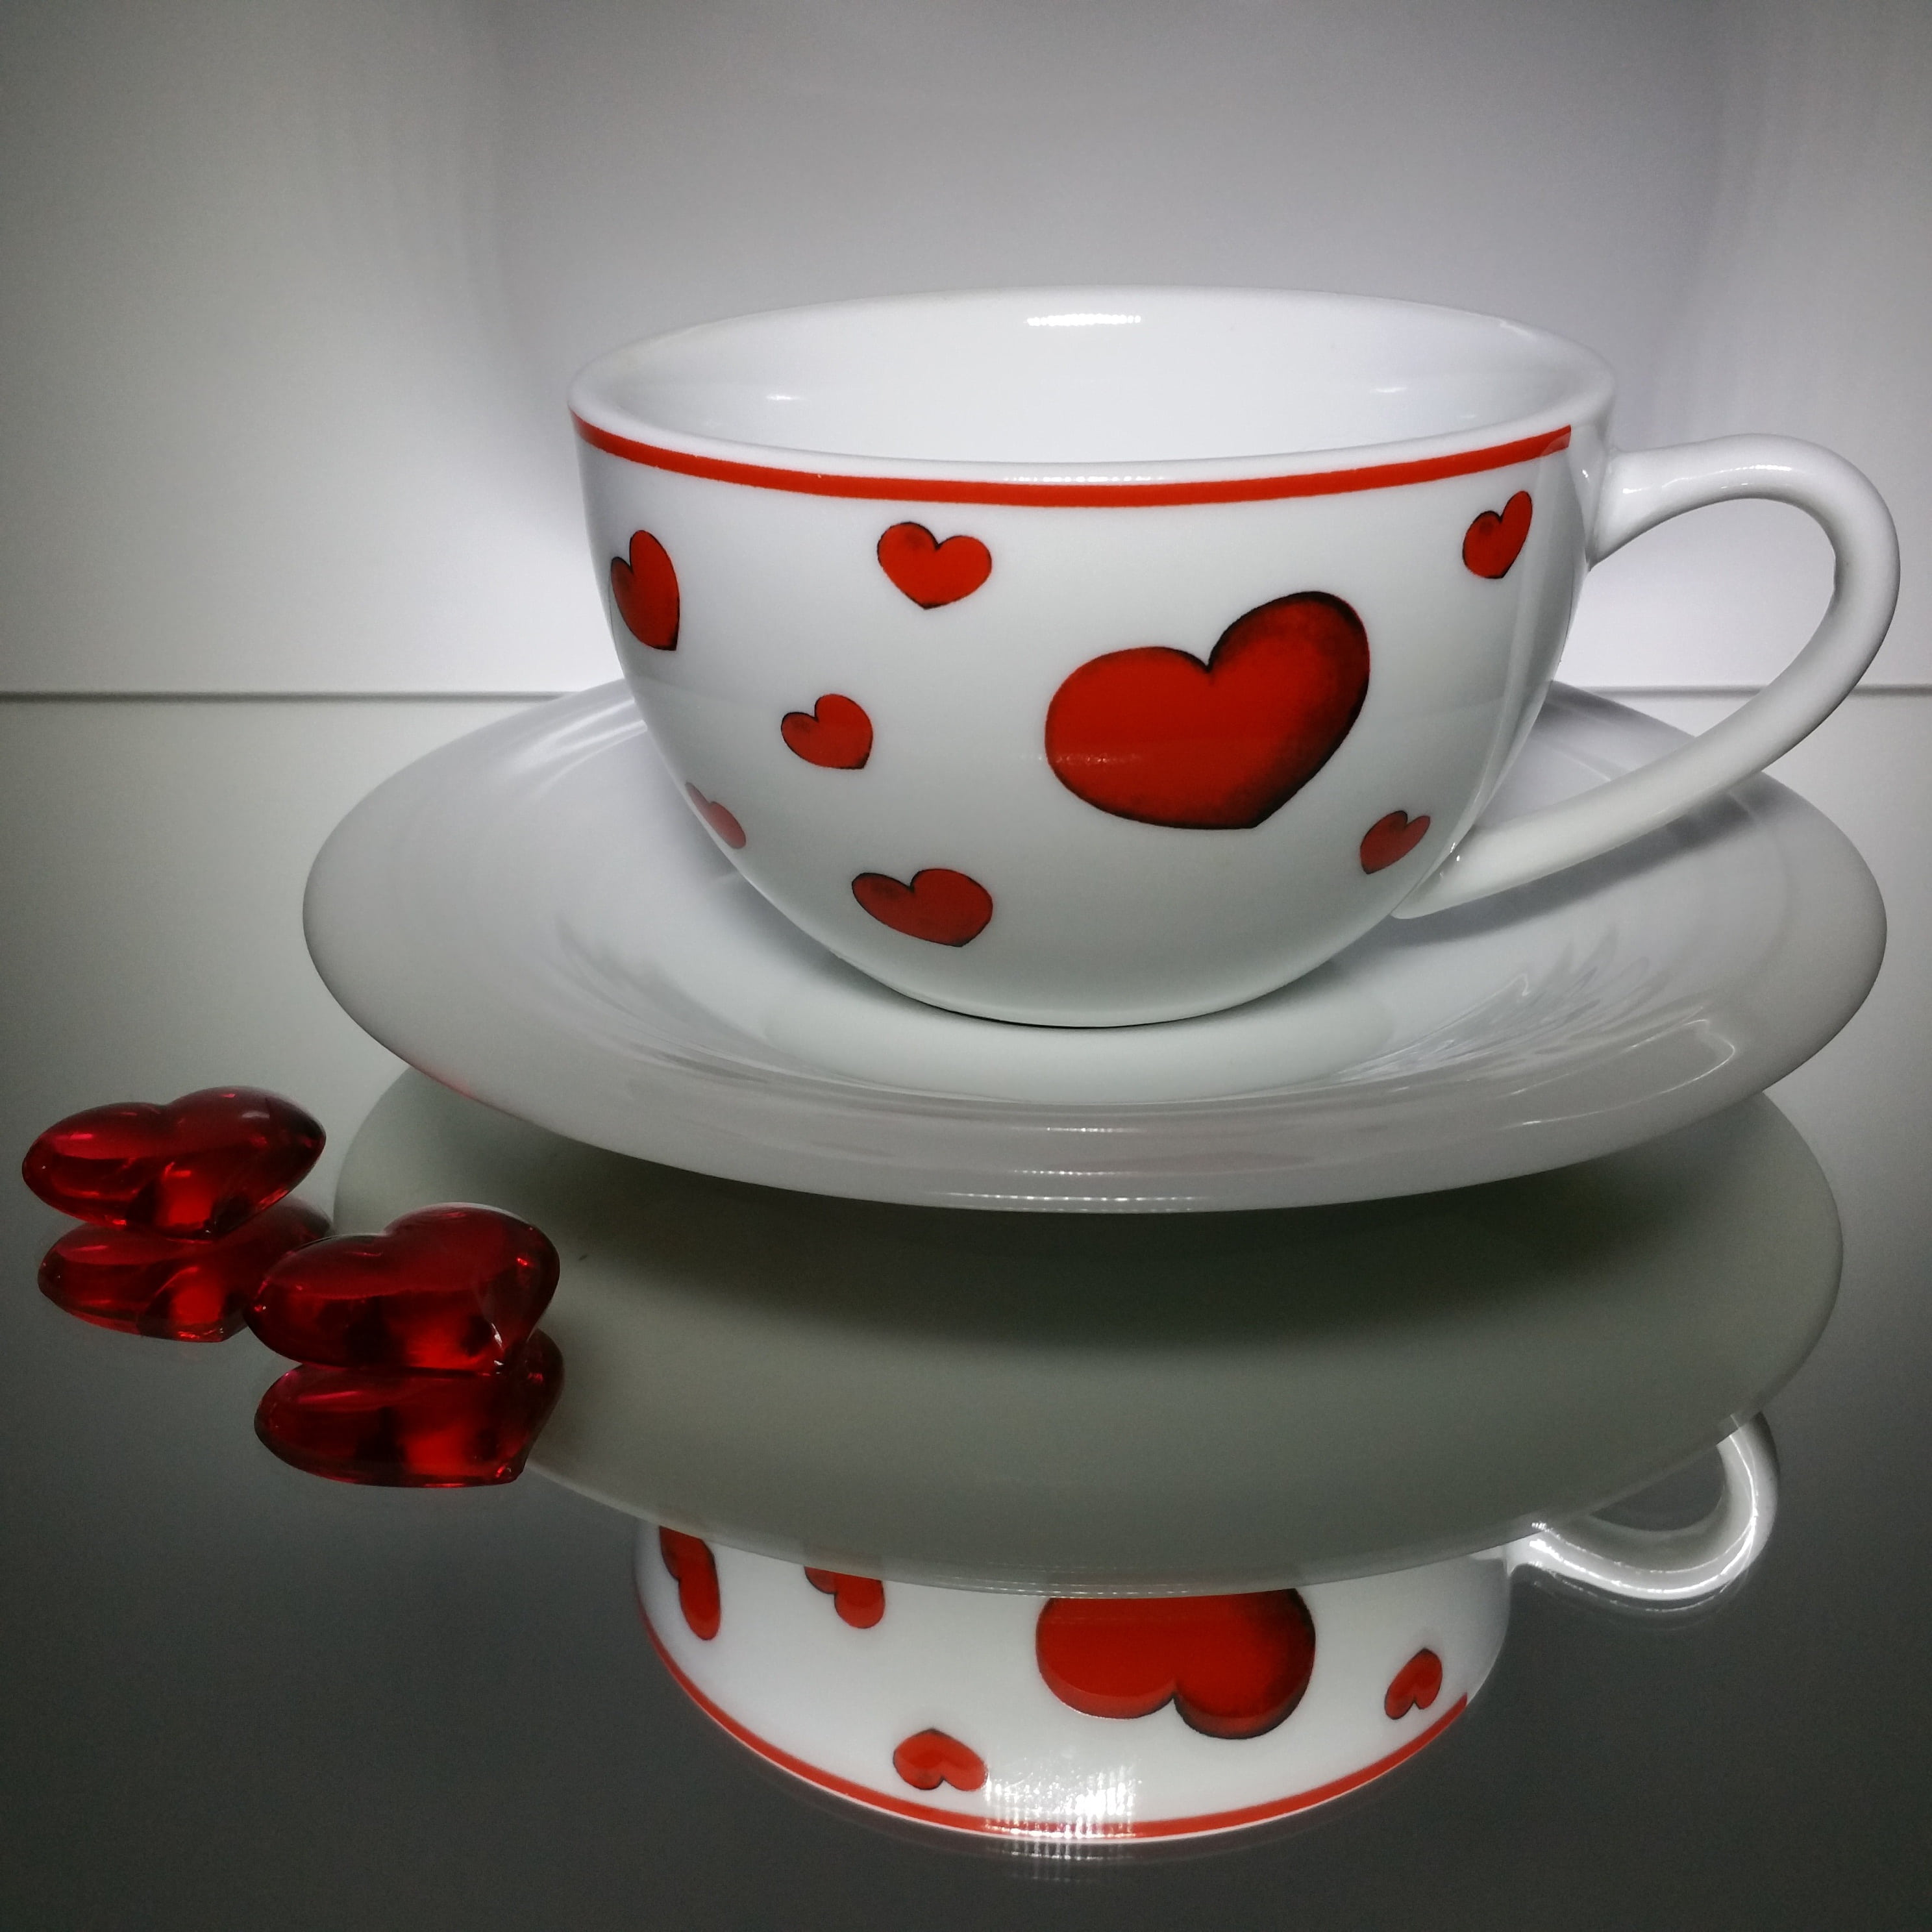 Happy Valentine's Day with White Hearts Ceramic Red 4 Mug Coffee Cup Gift